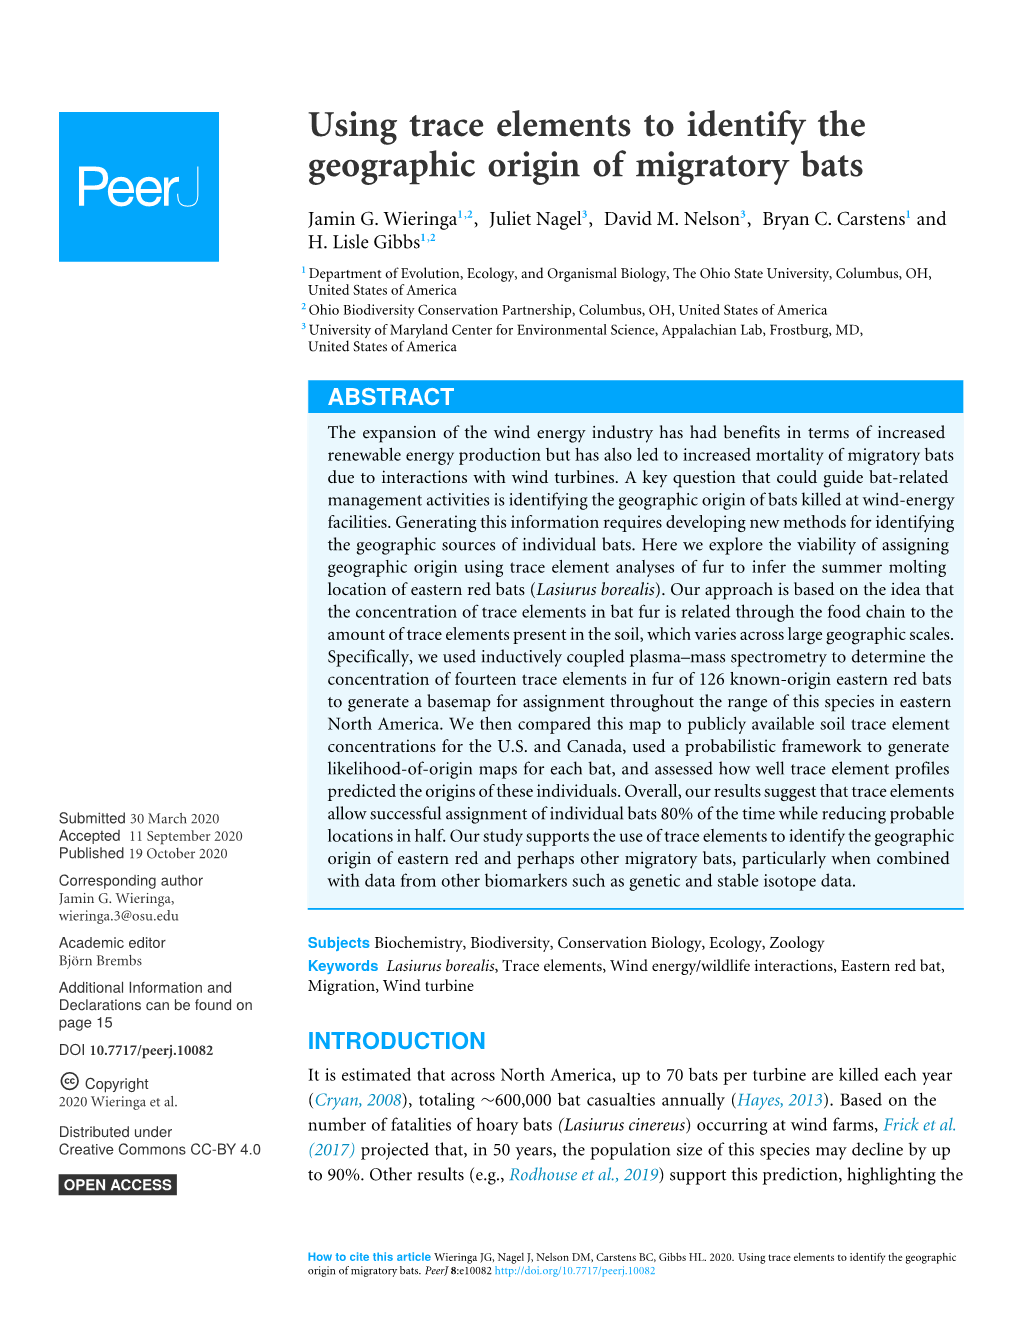 Using Trace Elements to Identify the Geographic Origin of Migratory Bats